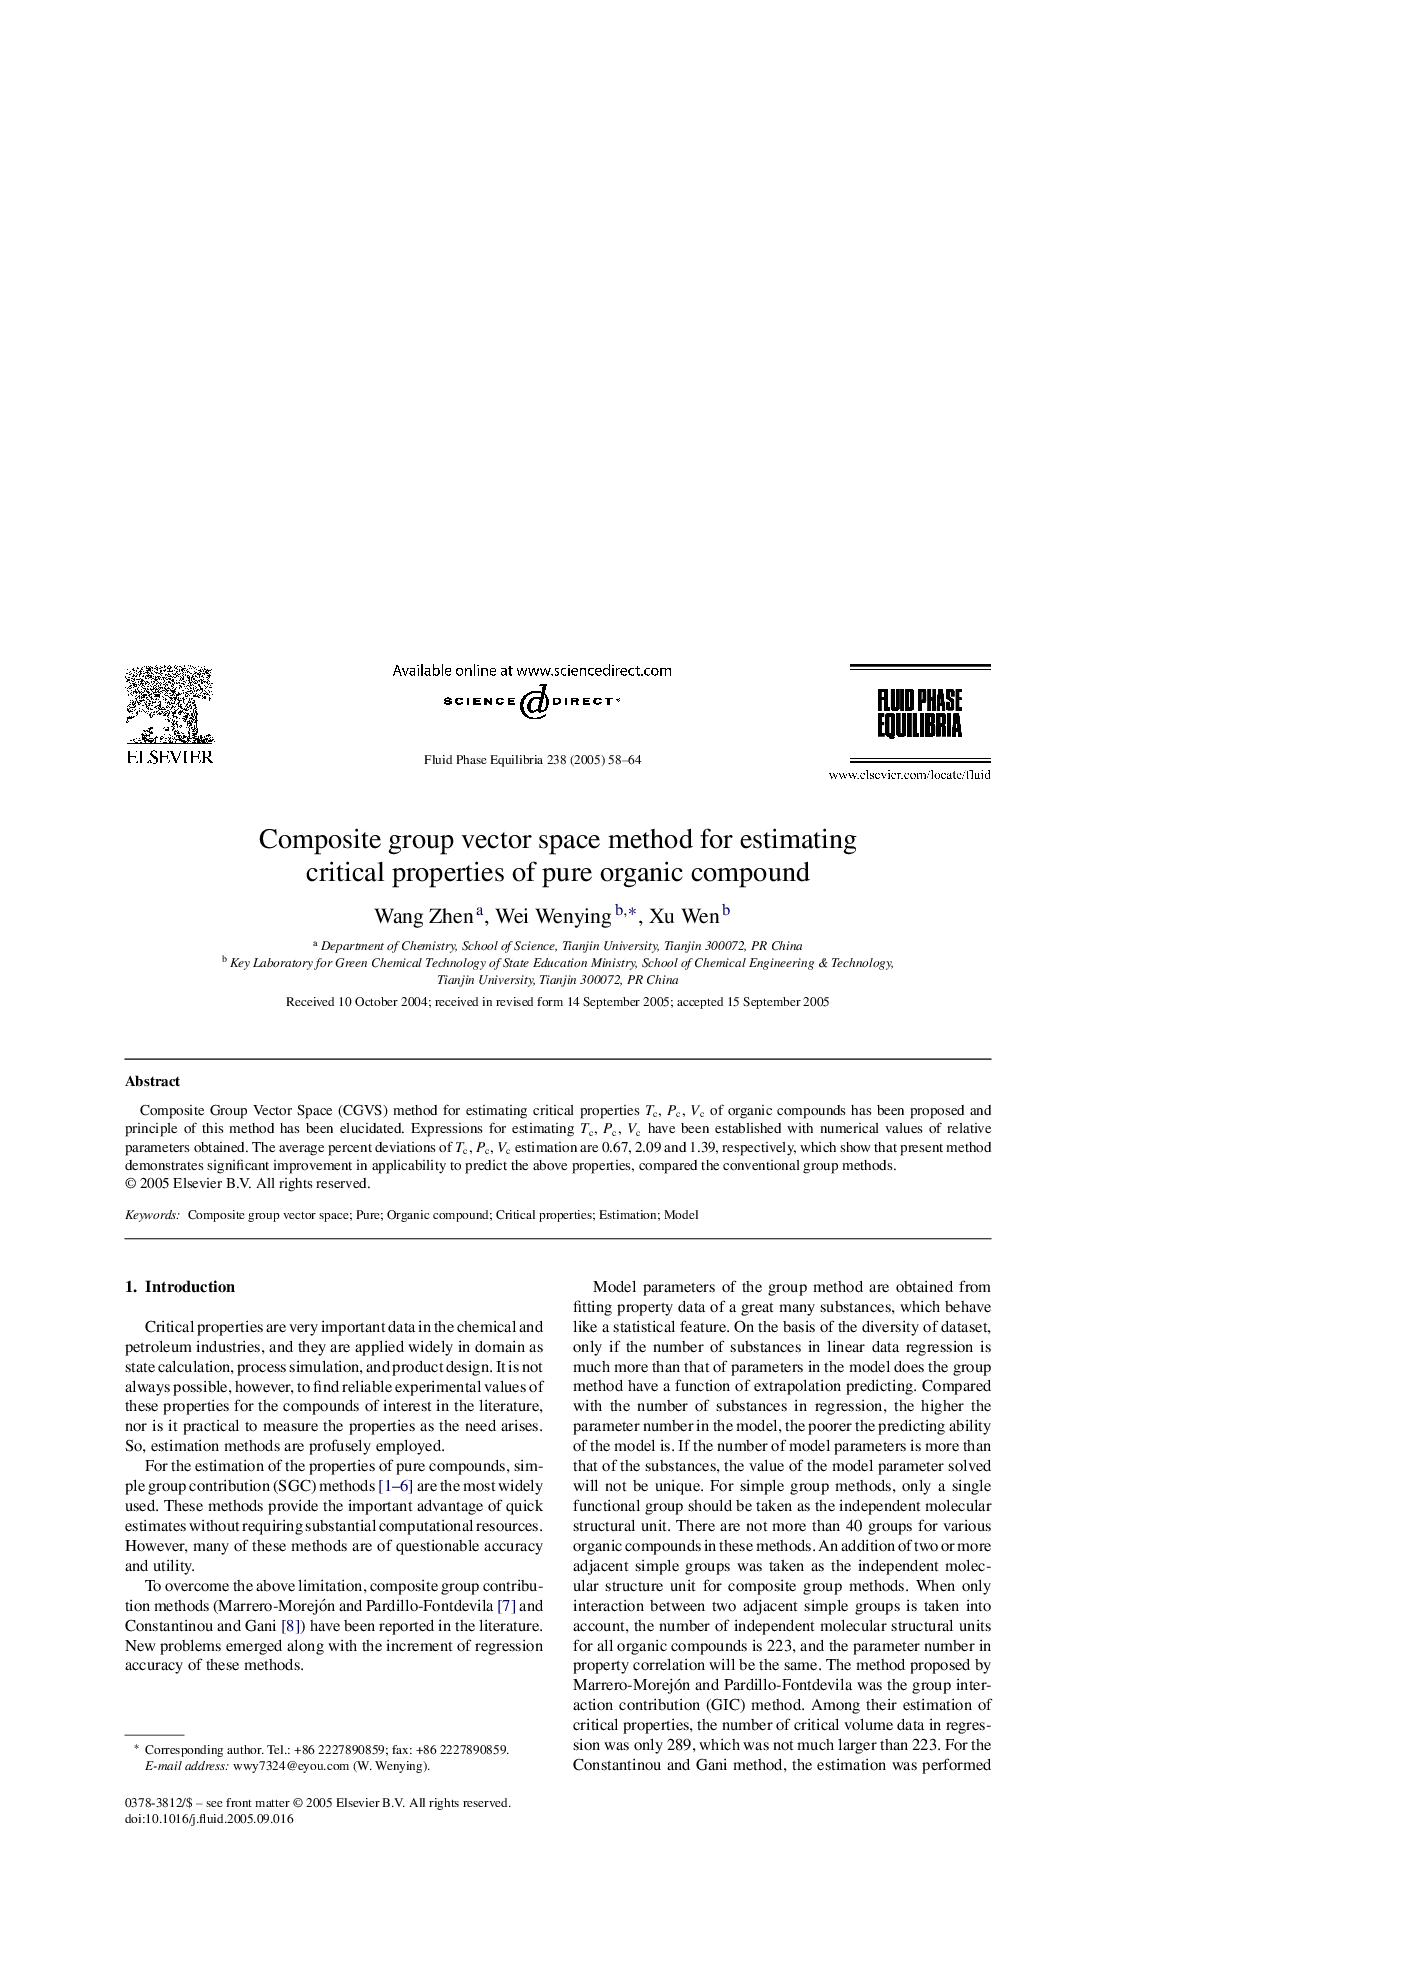 Composite group vector space method for estimating critical properties of pure organic compound